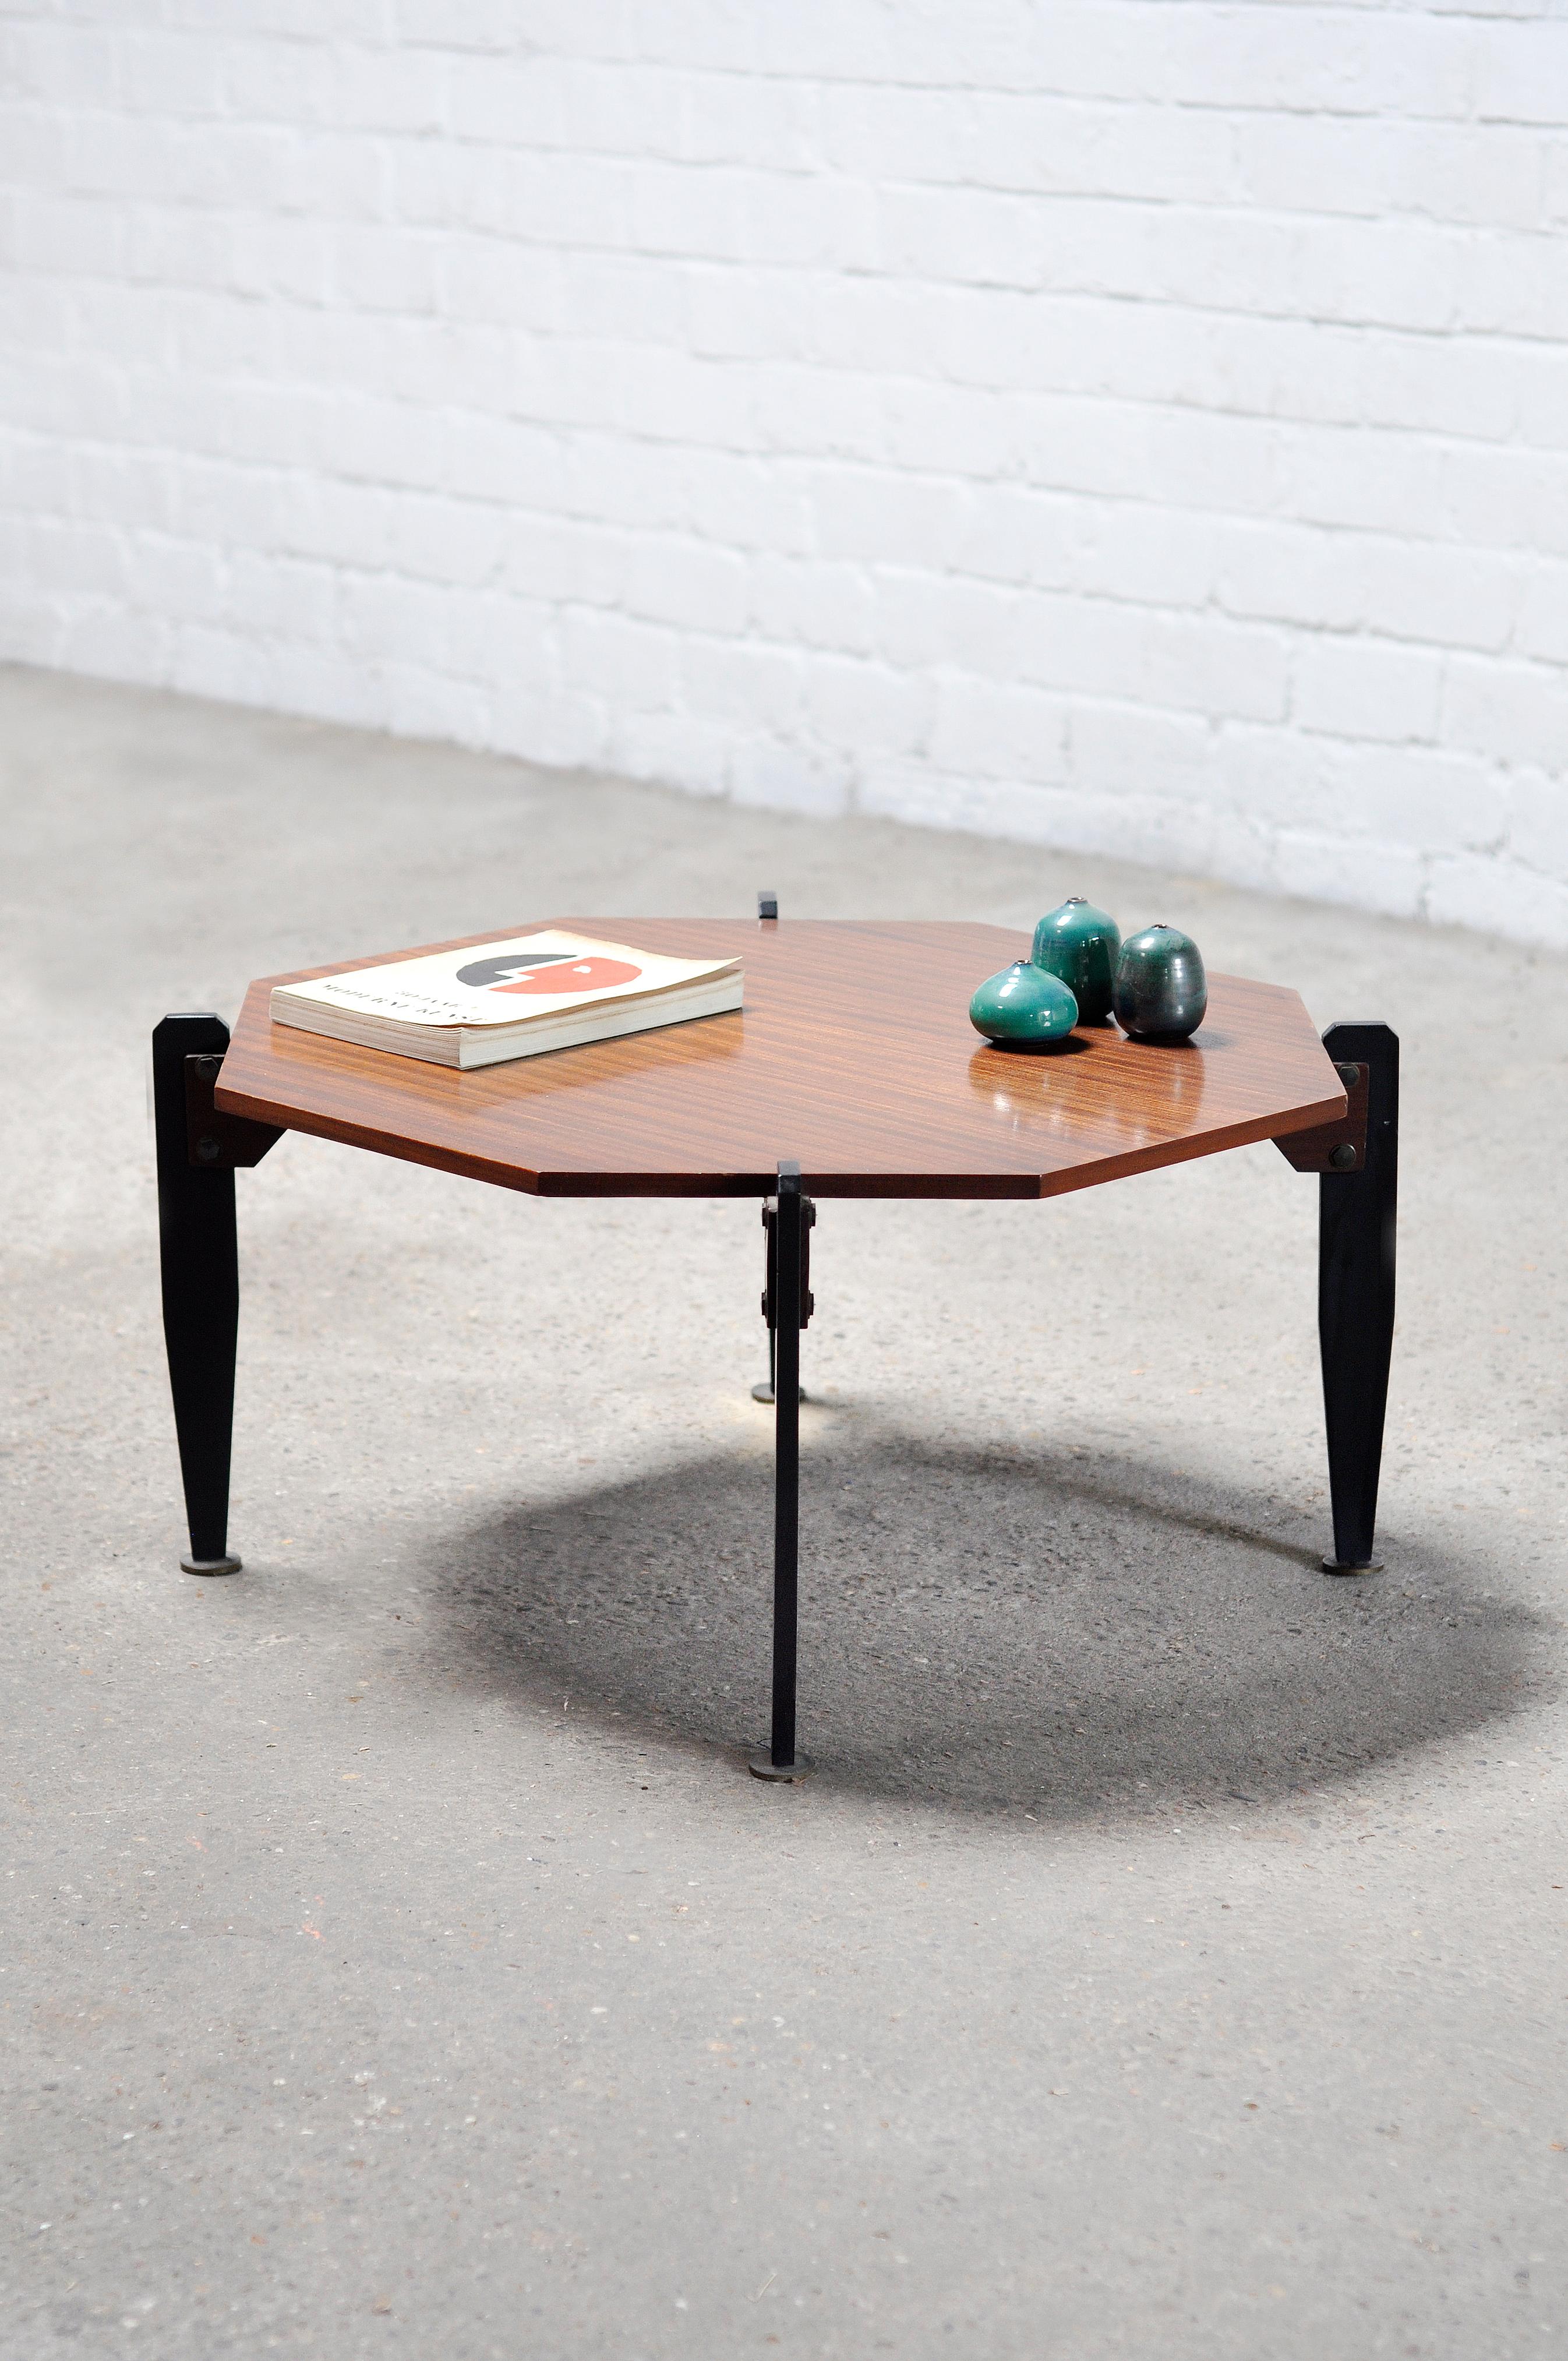 Italian Modernist Coffee Table in Teak And Lacquered Metal, 1950s For Sale 4